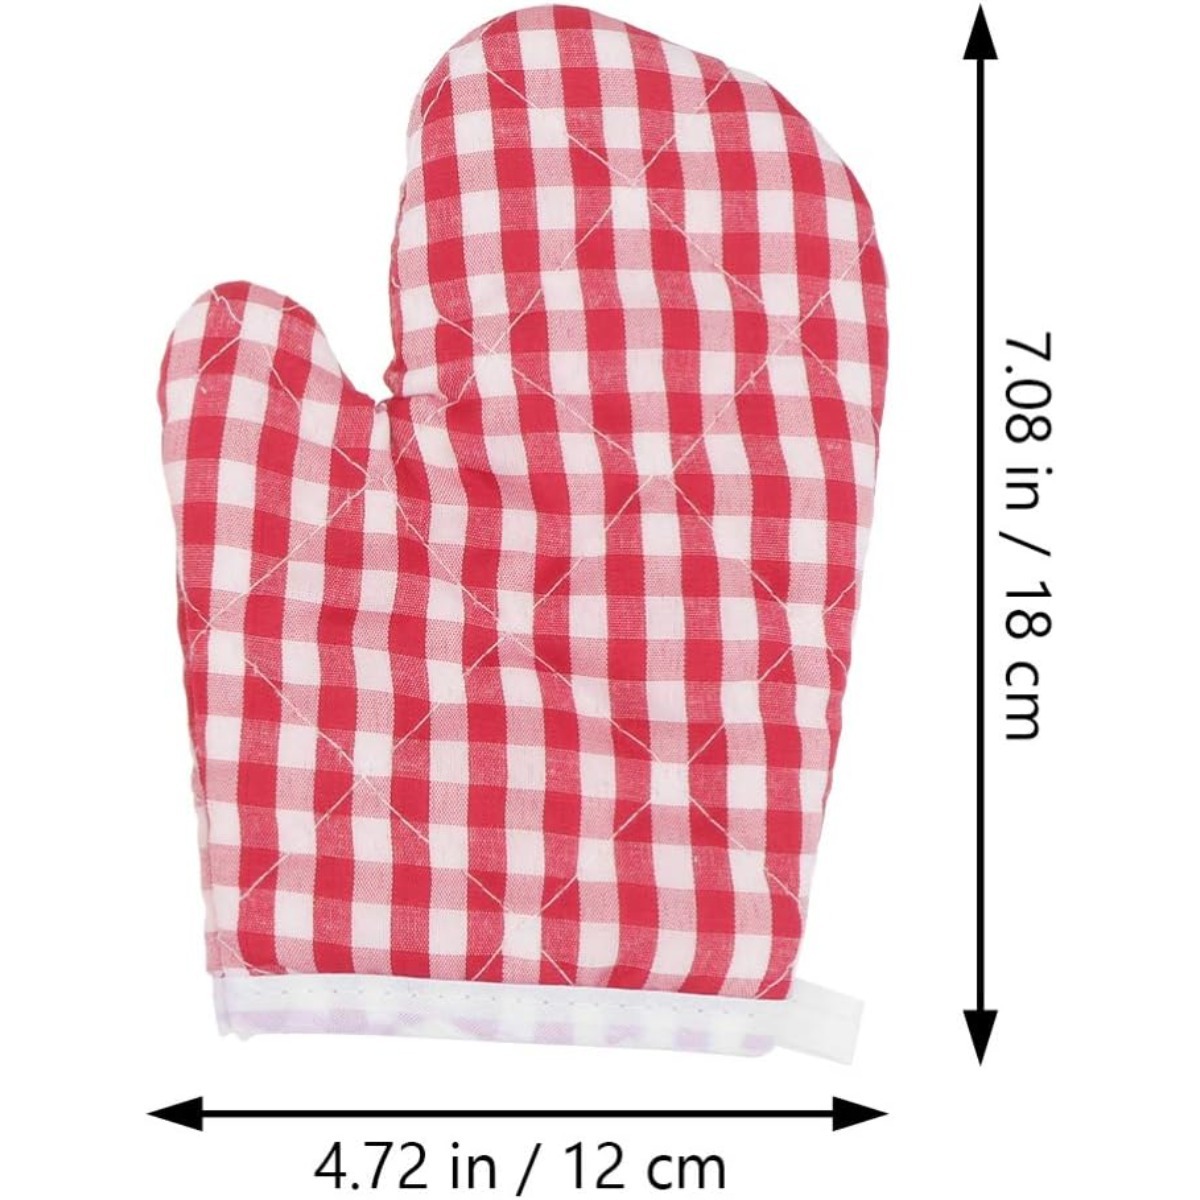  DOITOOL 2Pcs Kids Oven Mitts Heat Resistant for Children Play  Kitchen, Anti- Scald Gloves Microwave Oven Gloves Kitchen Mitts for Kids  Toddler Safe Baking Cooking ( Red Checkered ) : Home